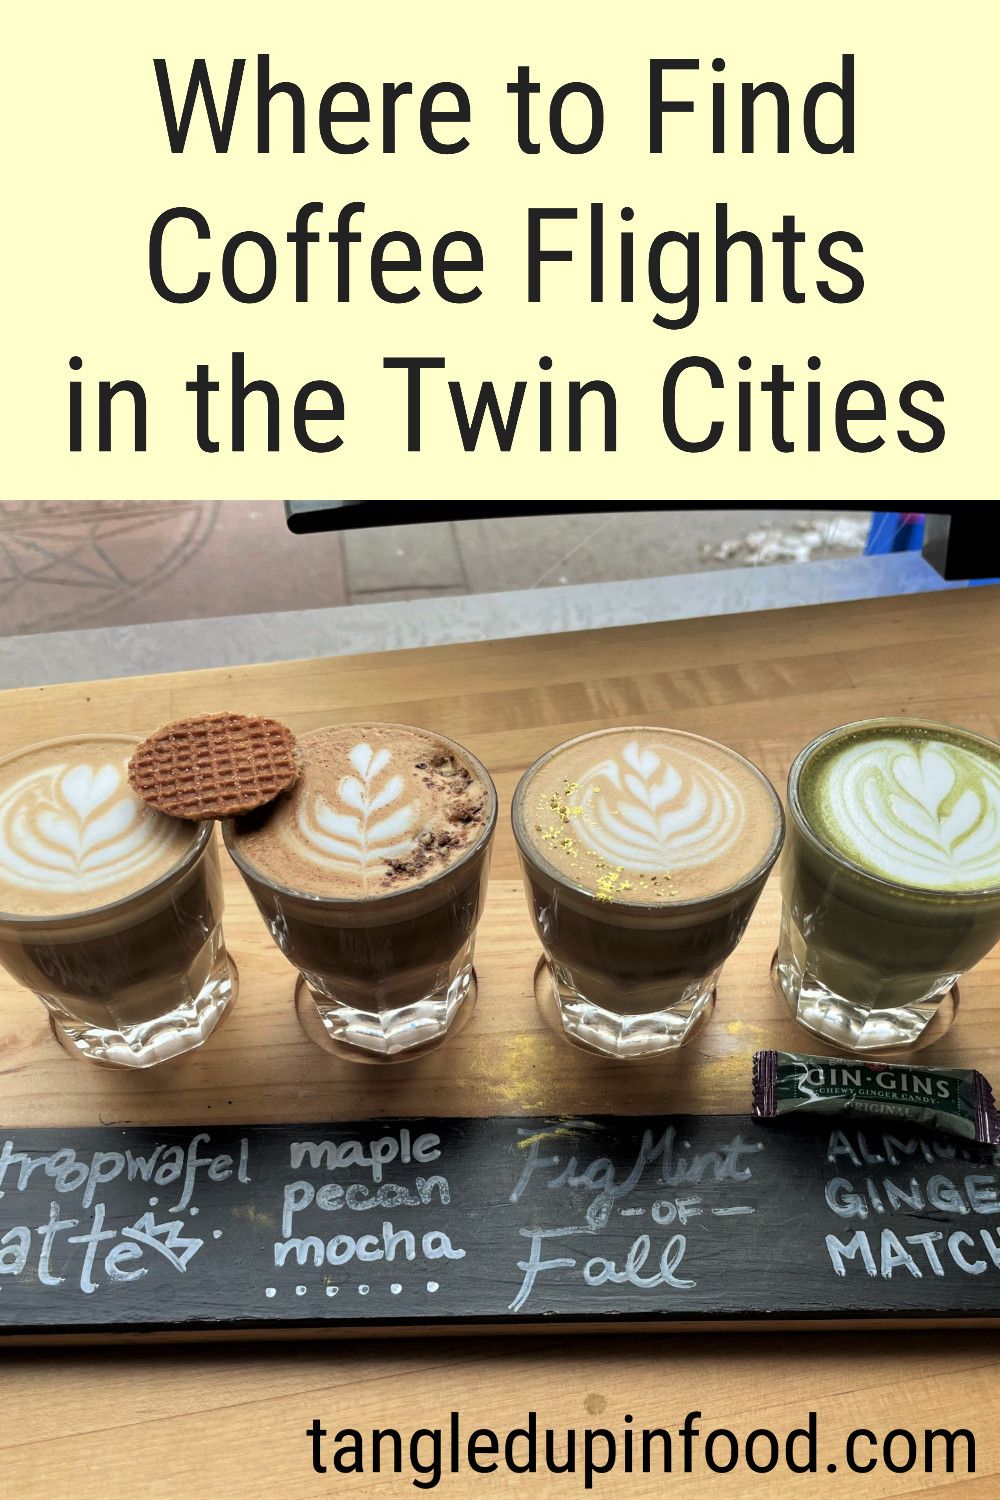 Photo of coffee flight and text reading "Where to Find Coffee Flights in the Twin Cities"